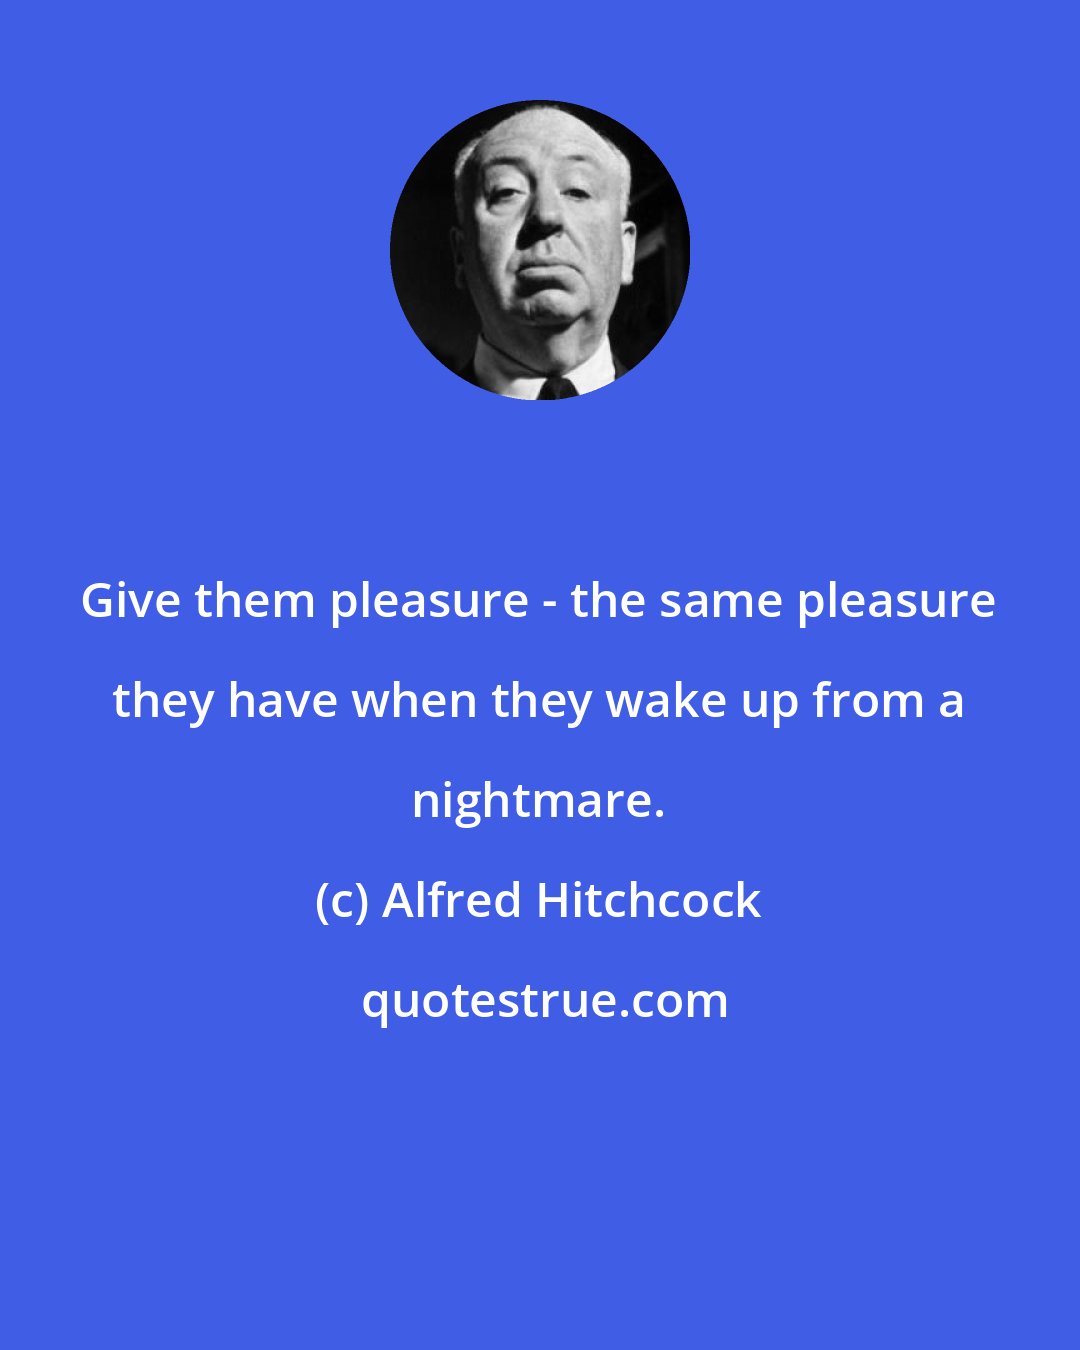 Alfred Hitchcock: Give them pleasure - the same pleasure they have when they wake up from a nightmare.